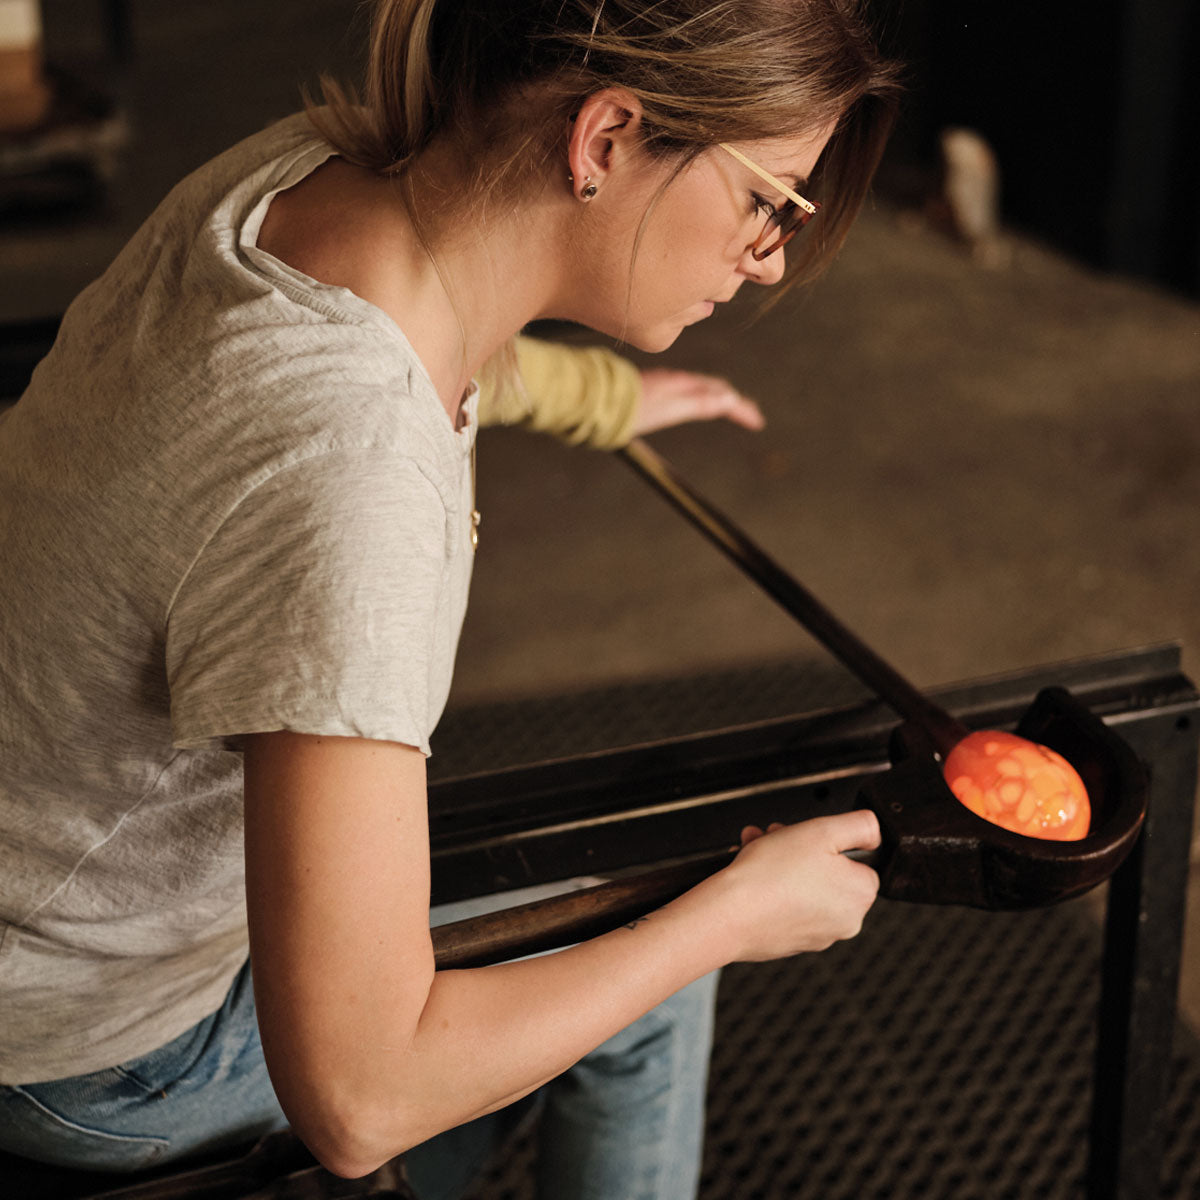 Introduction to glassblowing class